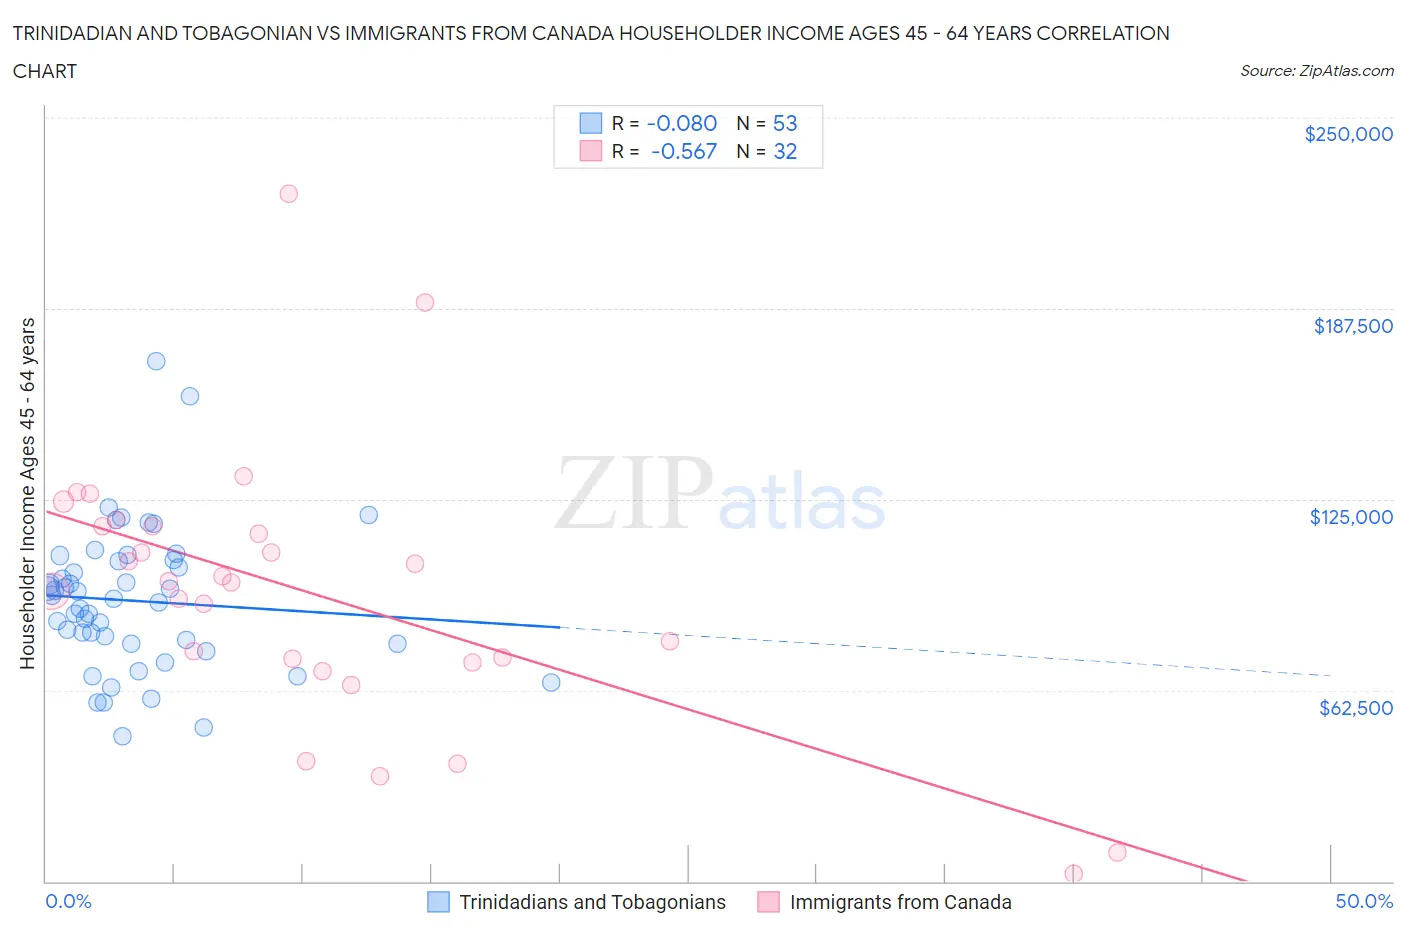 Trinidadian and Tobagonian vs Immigrants from Canada Householder Income Ages 45 - 64 years